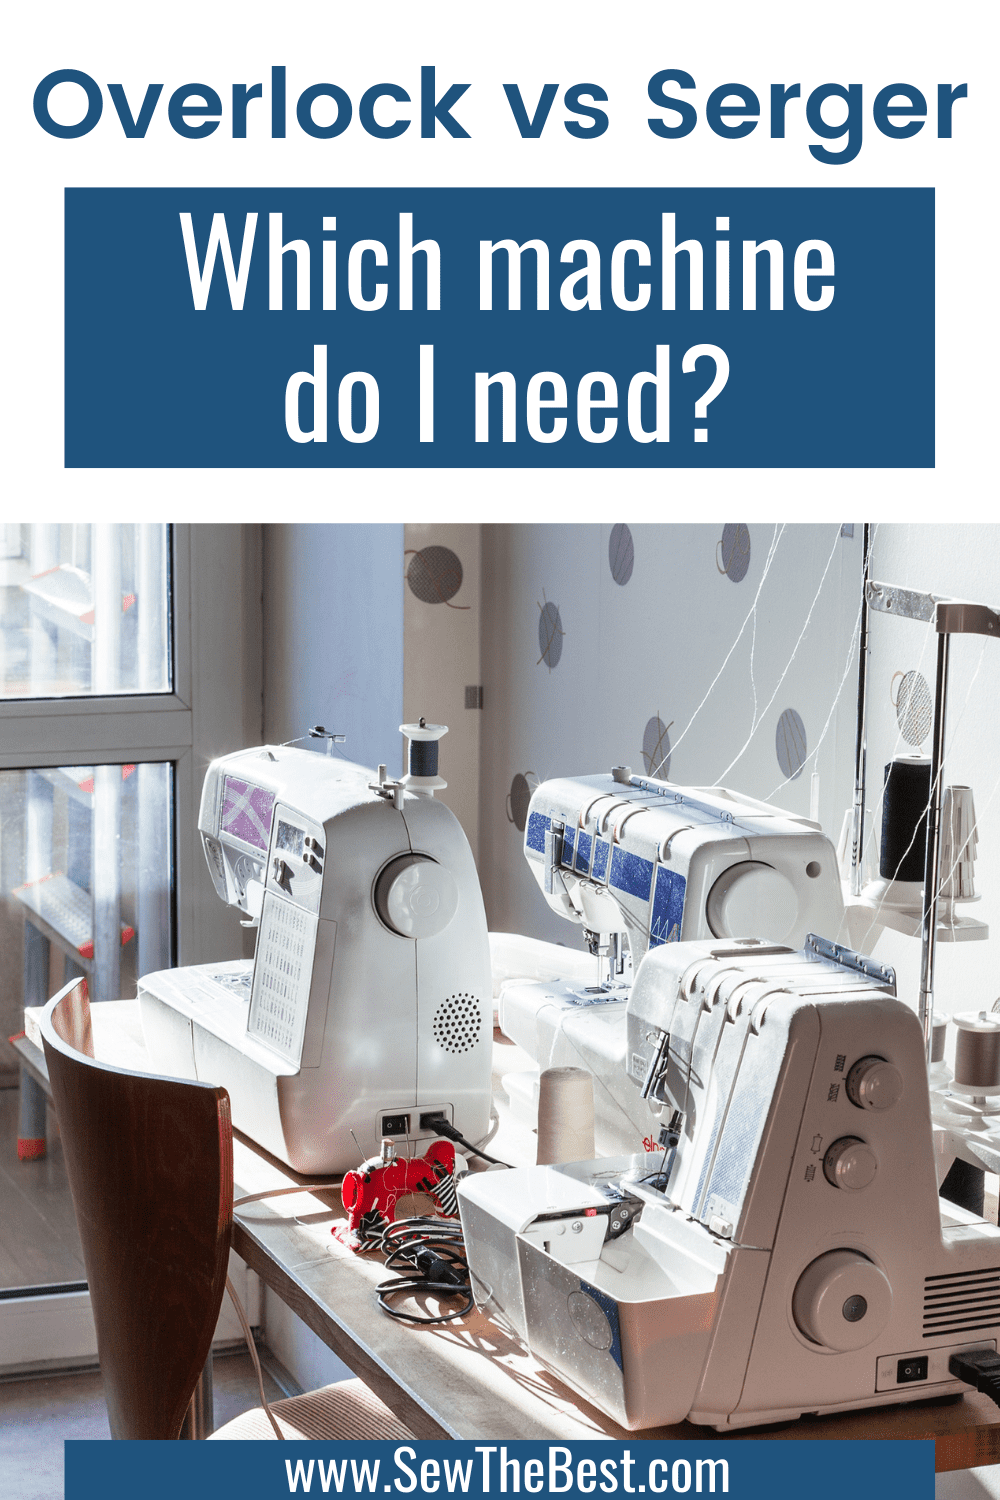 Overlock vs Serger - Which machine do I need? Picture of a sewing room with sewing machine, overlock, and coverstitch machine follows.